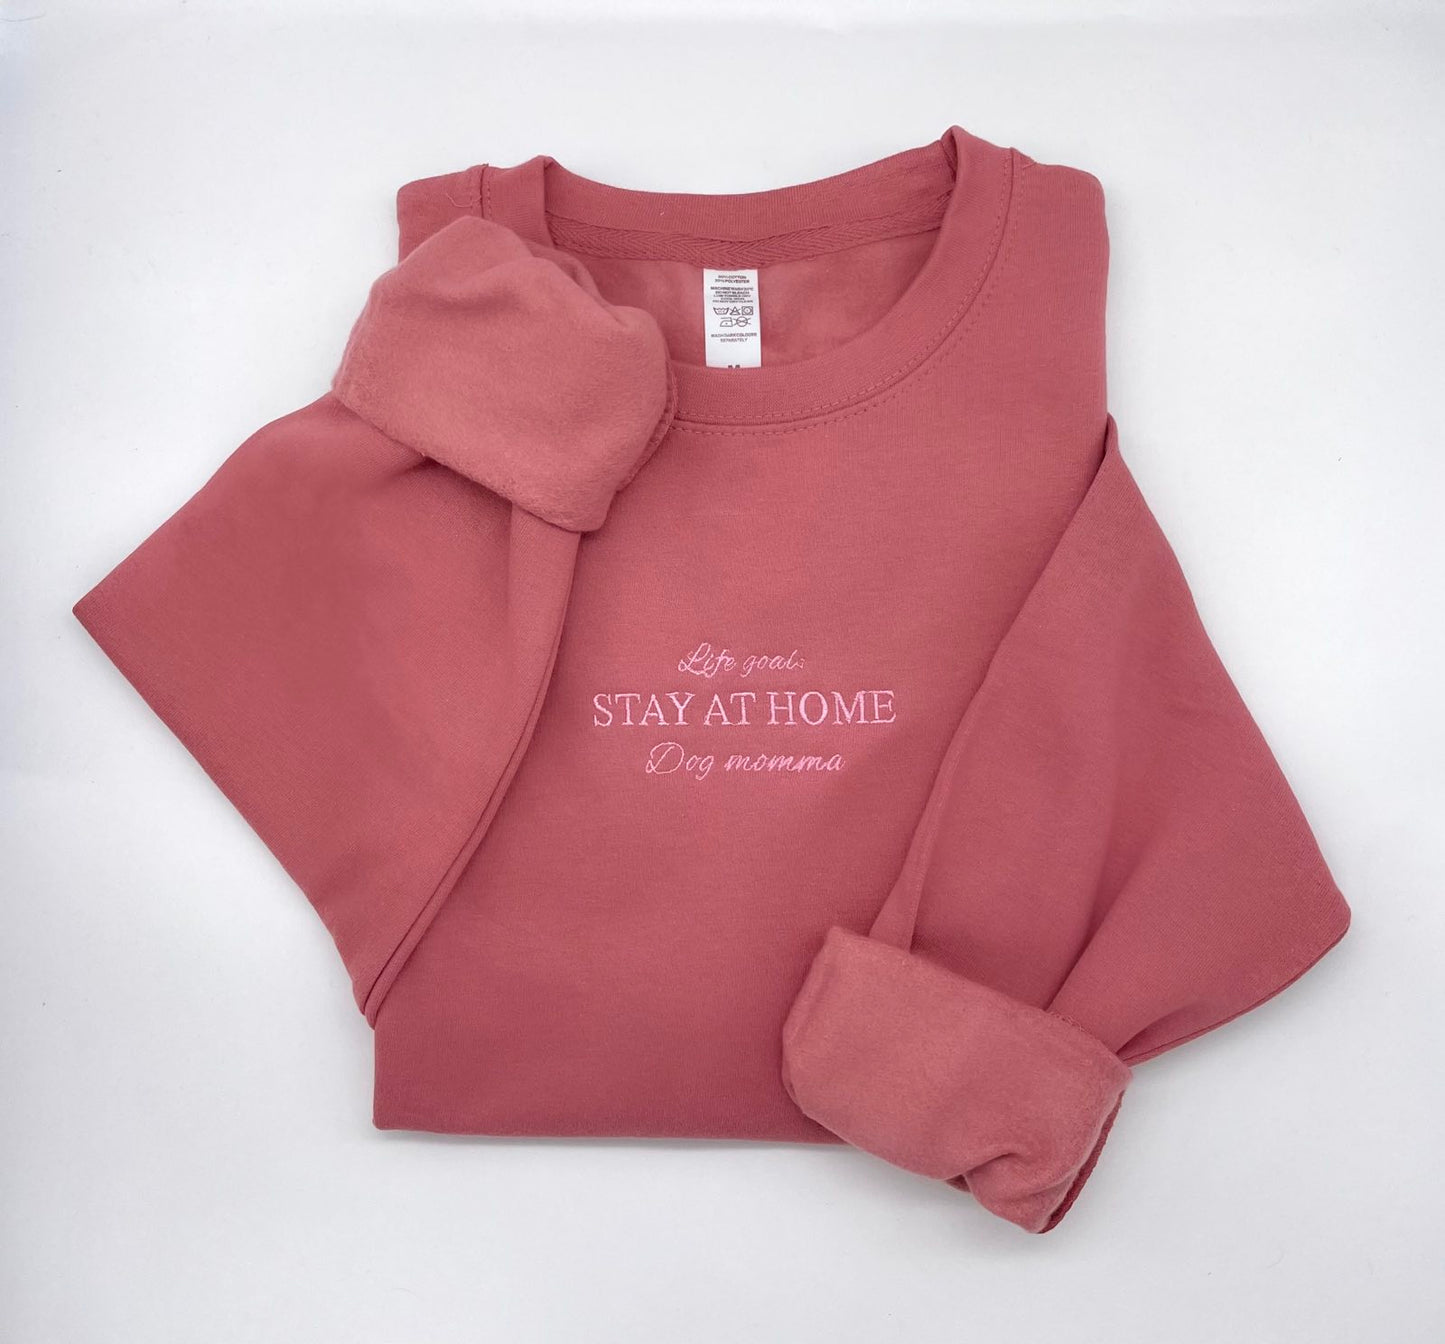 Embroidered Sweatshirt - 'Stay At Home Dog Momma' - Dusty Rose